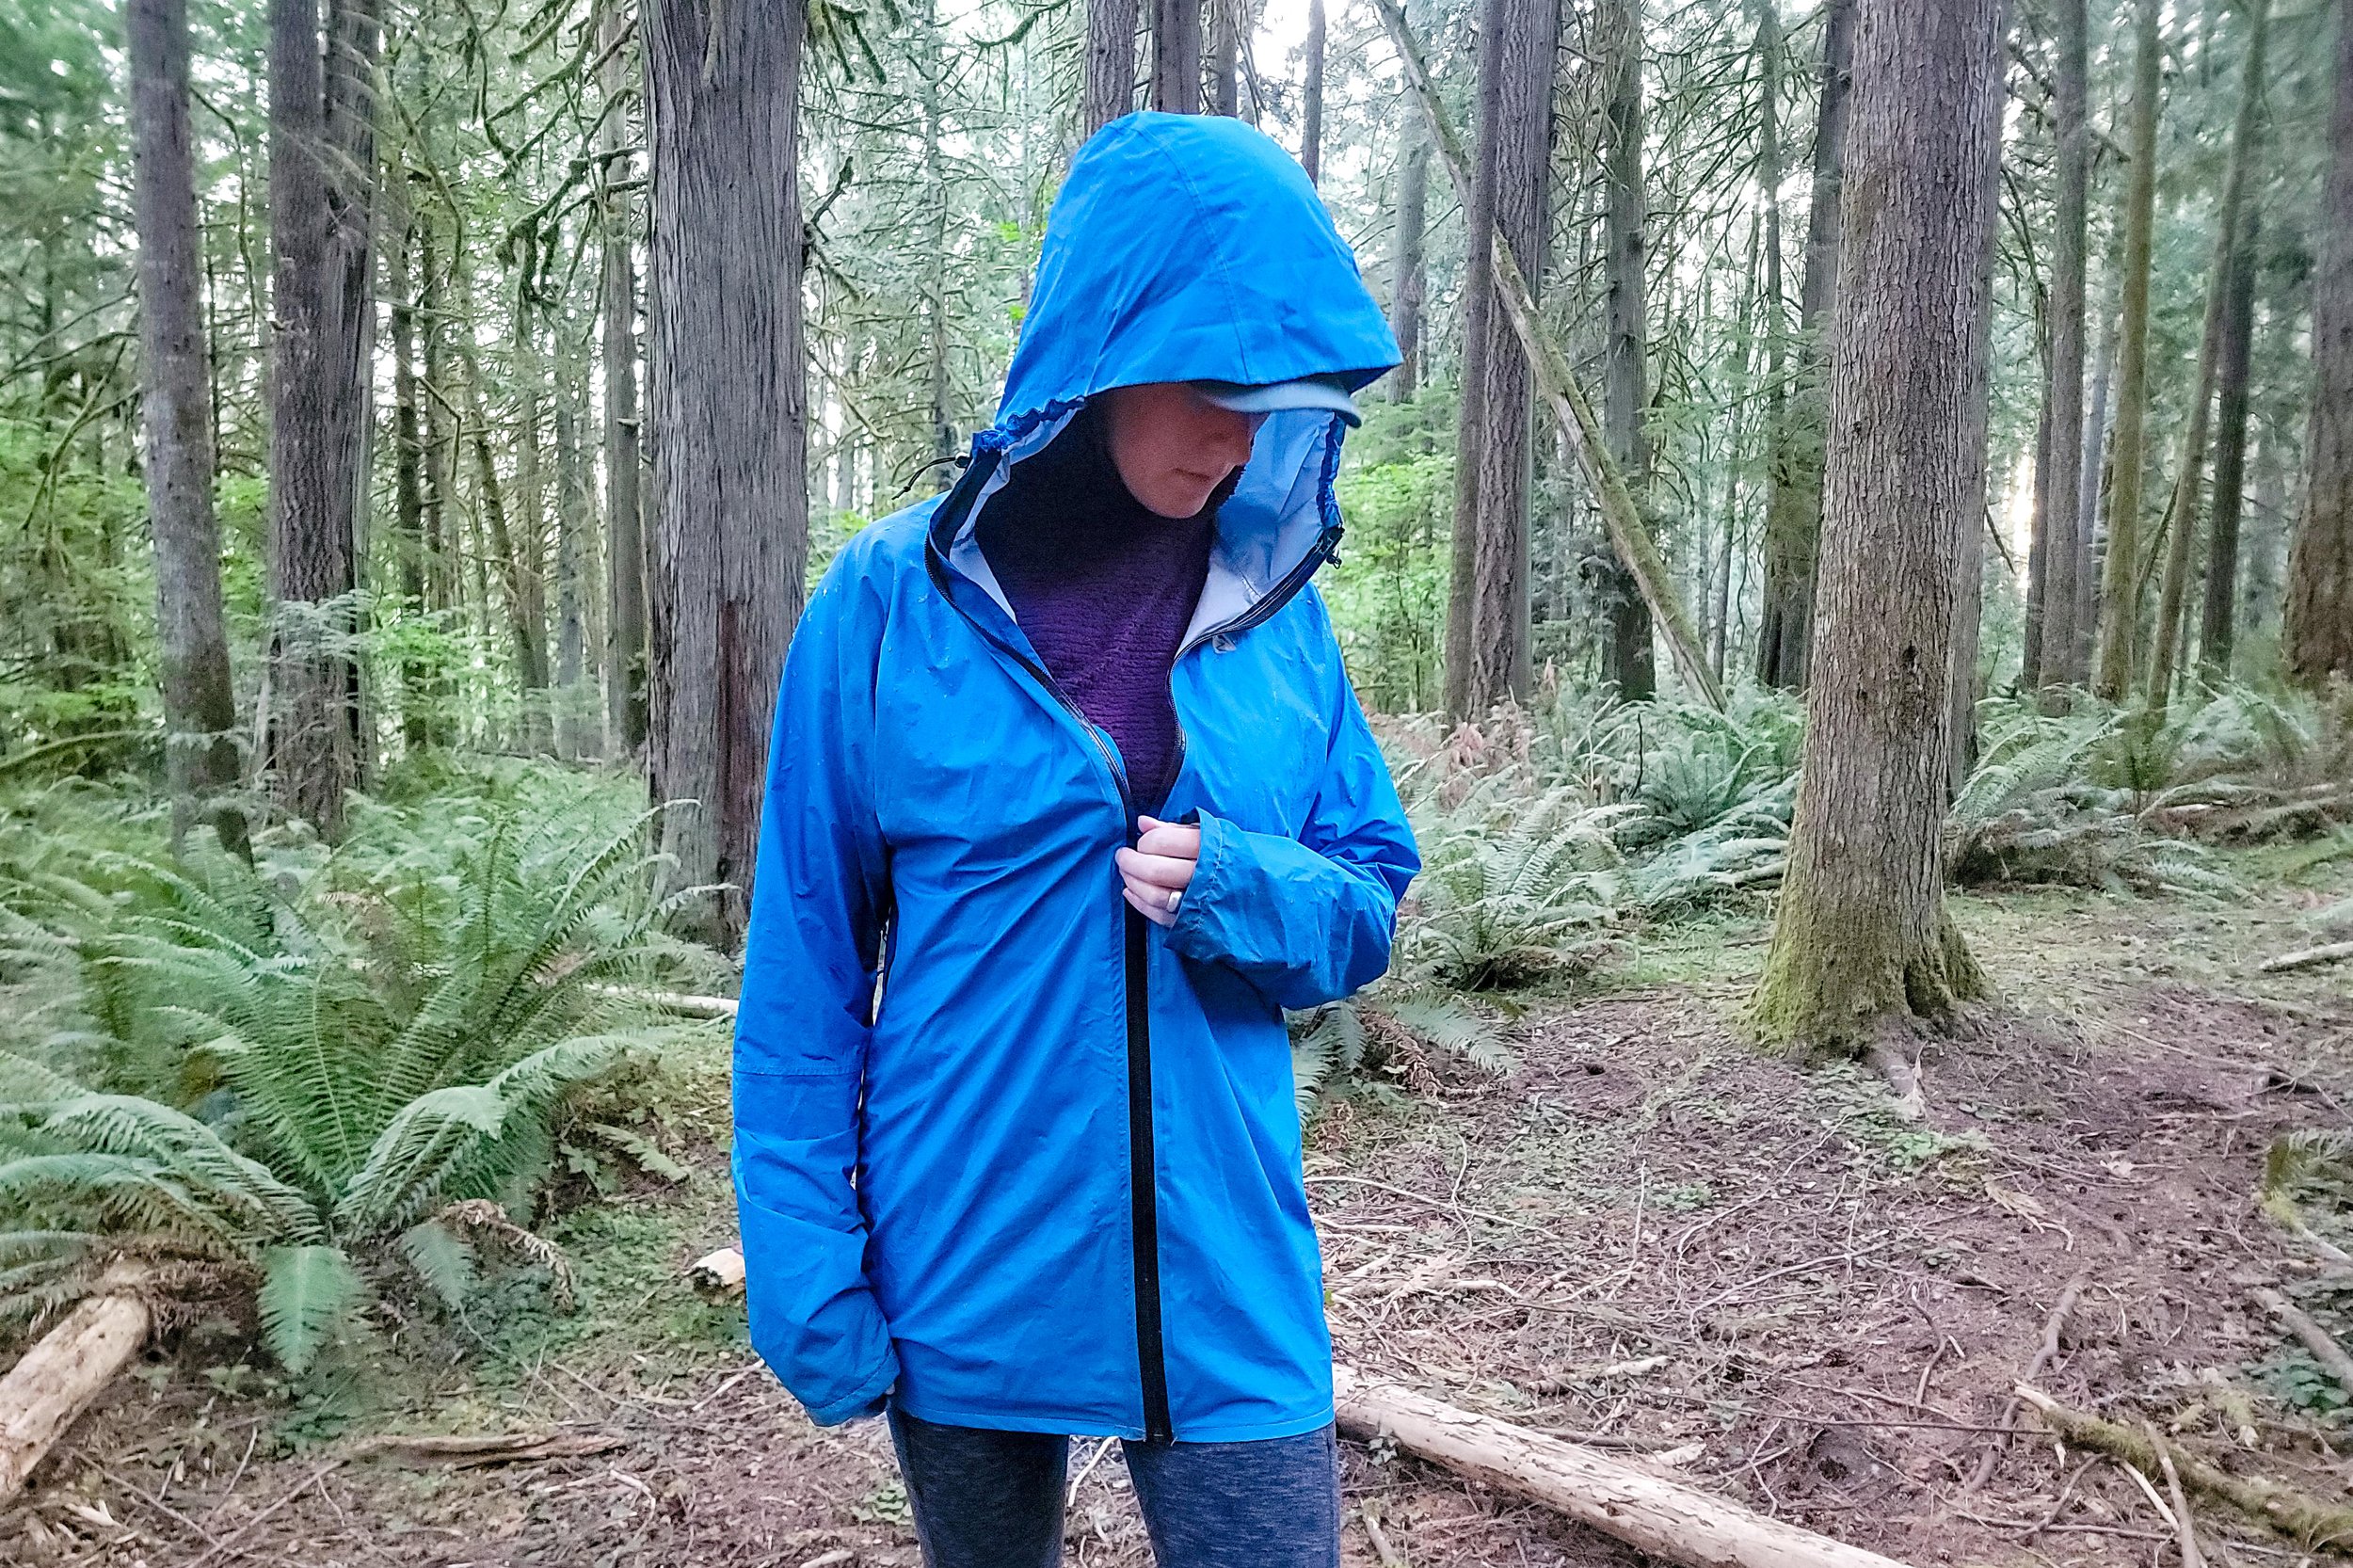 A hiker wearing the Zpacks Vertice Jacket in a forest